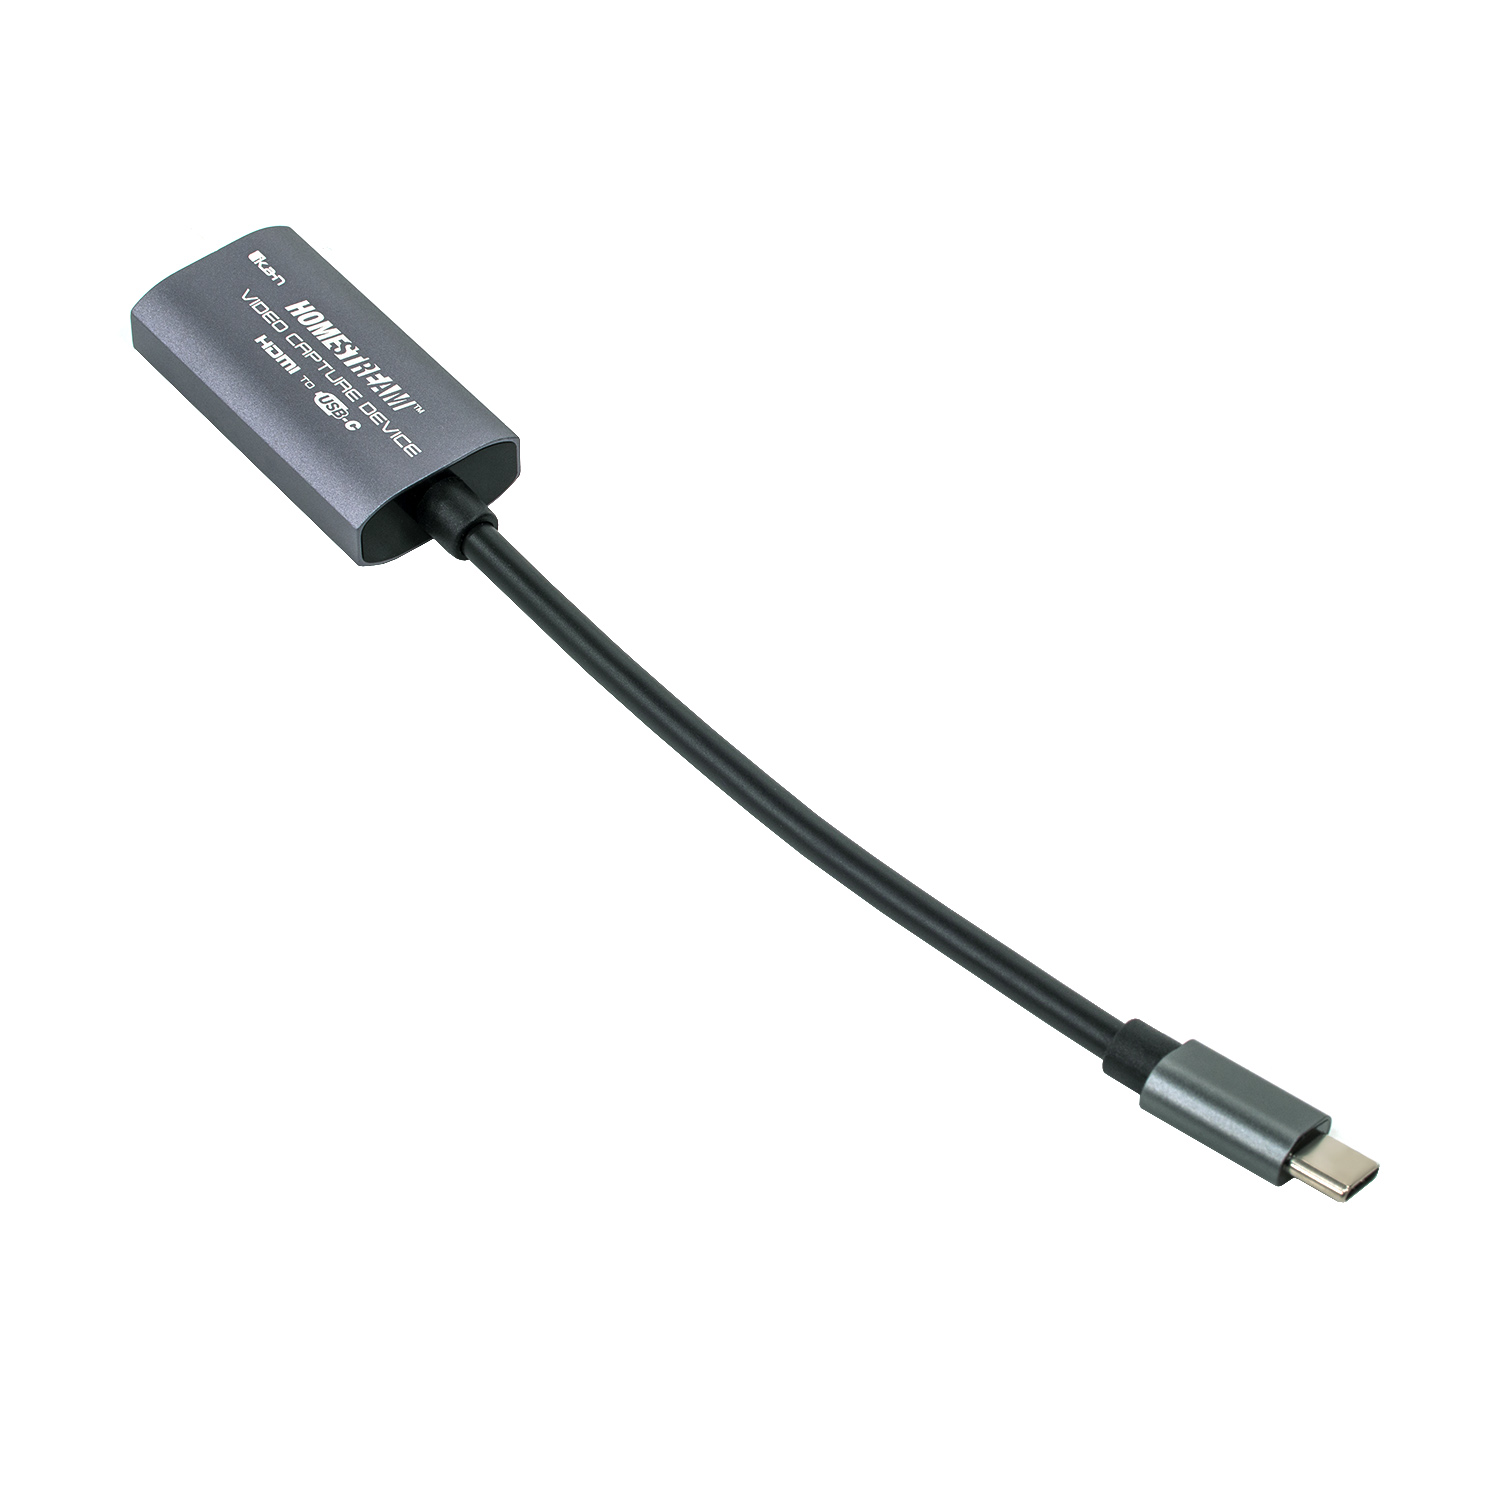 Inland HDMI to USB A/C Video Capture Dongle - Micro Center